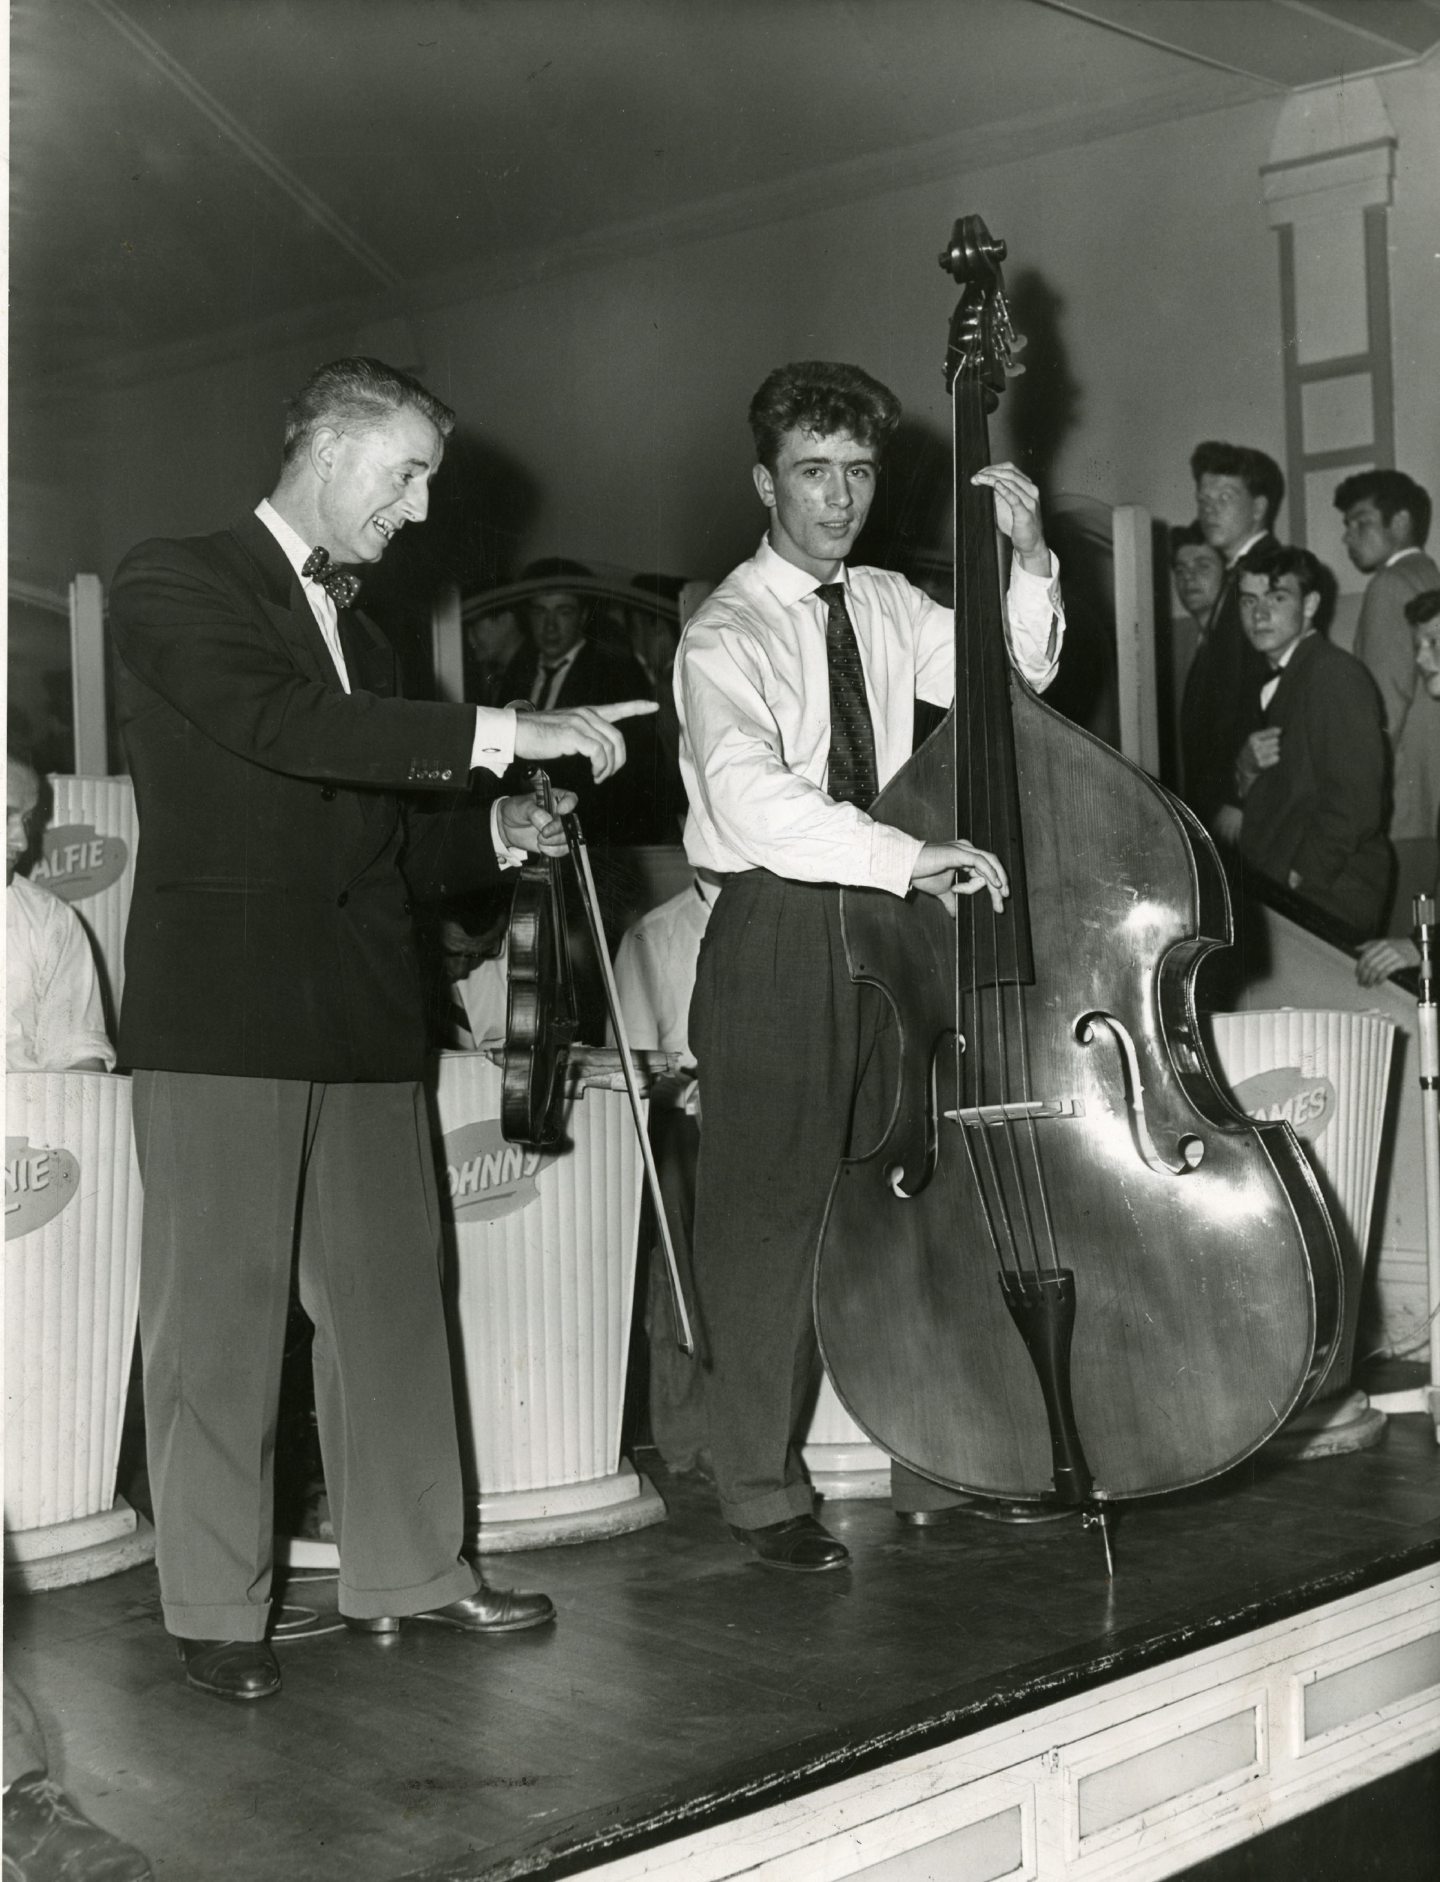 Andy Lothian performing alongside his son Andi at the Palais in 1958. Image: DC Thomson.